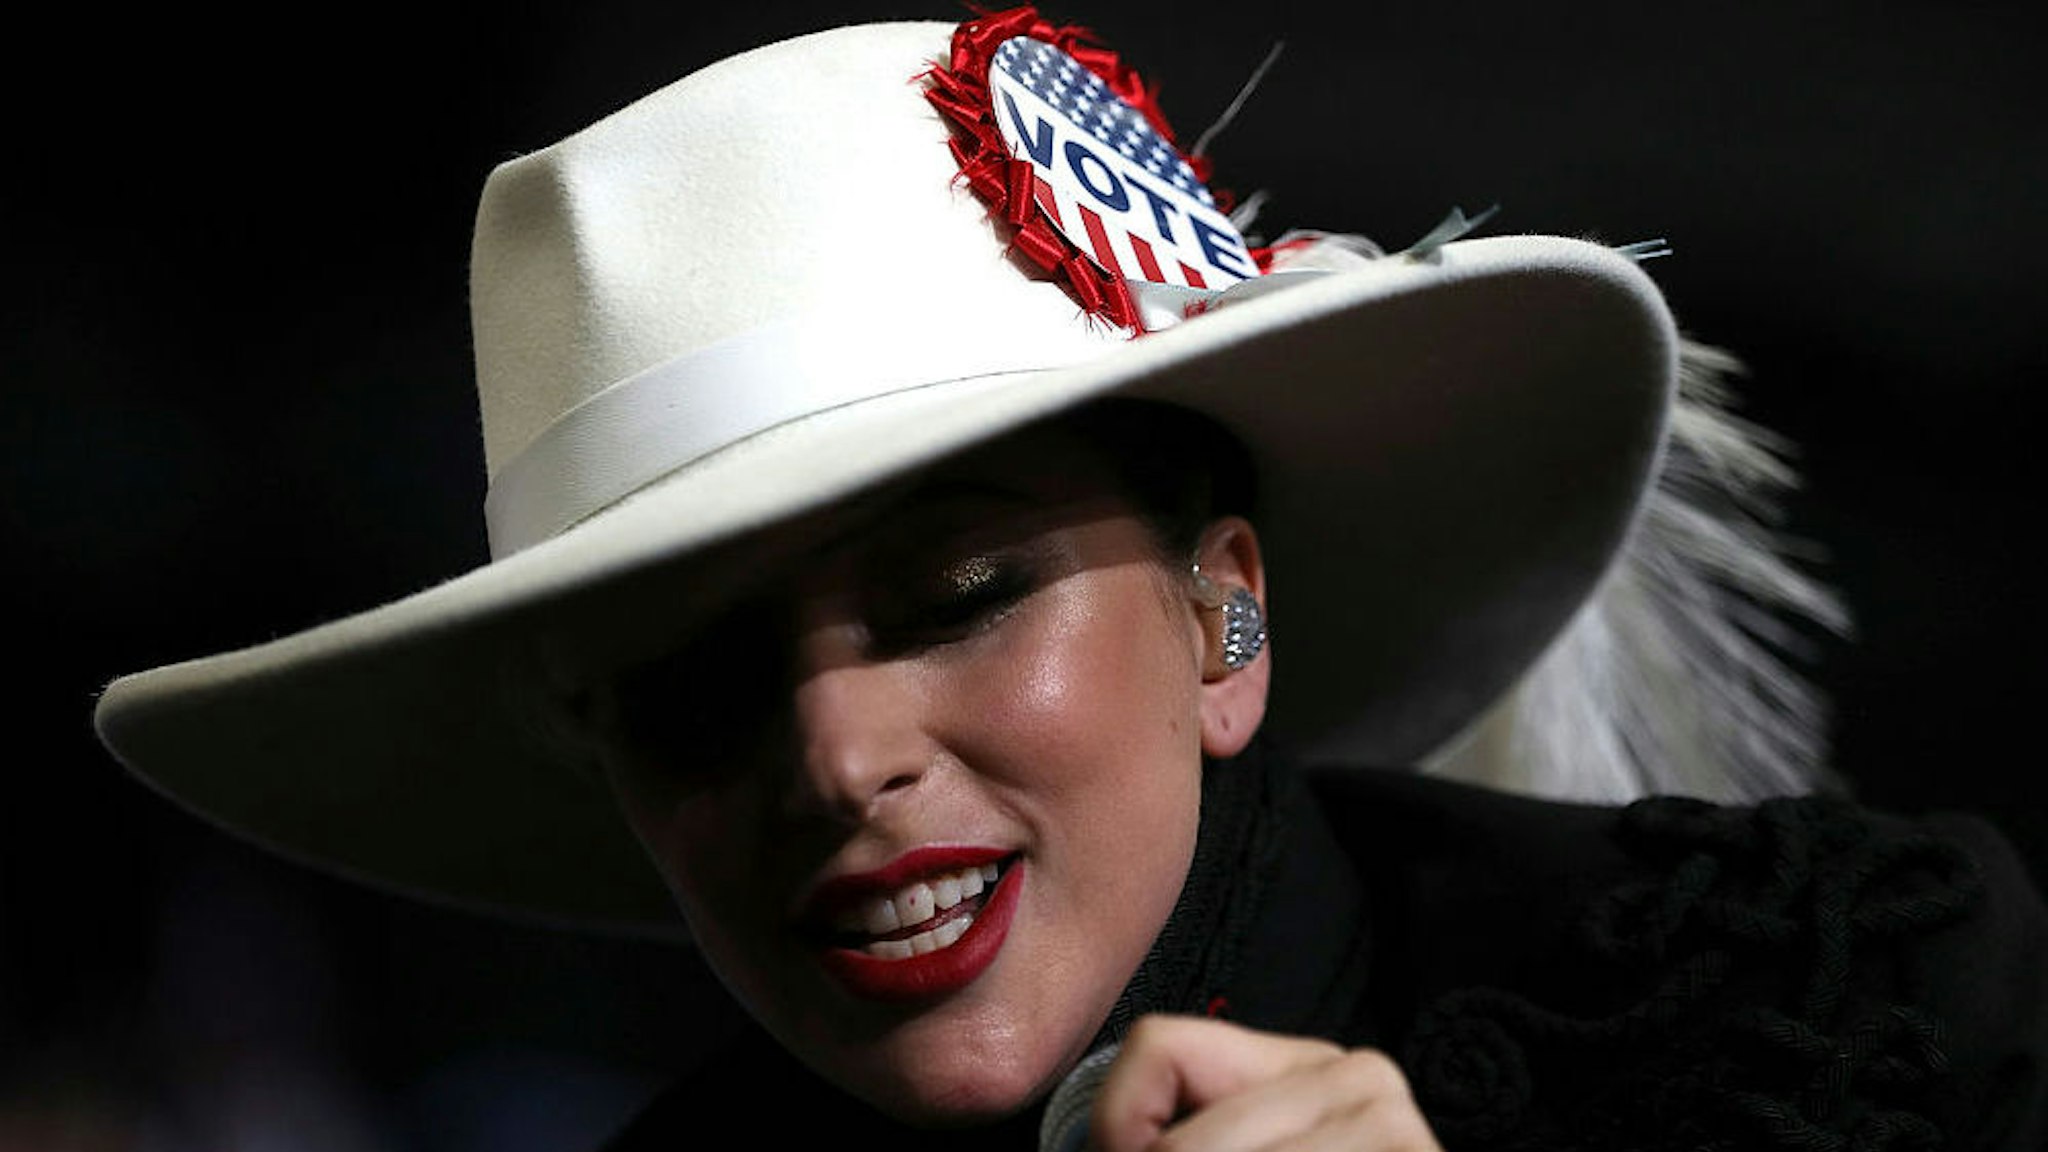 RALEIGH, NC - NOVEMBER 08: Musician Lady Gaga performs during a campaign rally with Democratic presidential nominee former Secretary of State Hillary Clinton at North Carolina State University on November 8, 2016 in Raleigh, North Carolina. The midnight rally followed Clinton campaigning in Pennsylvania, Michigan and North Carolina in the lead up to today's general election.